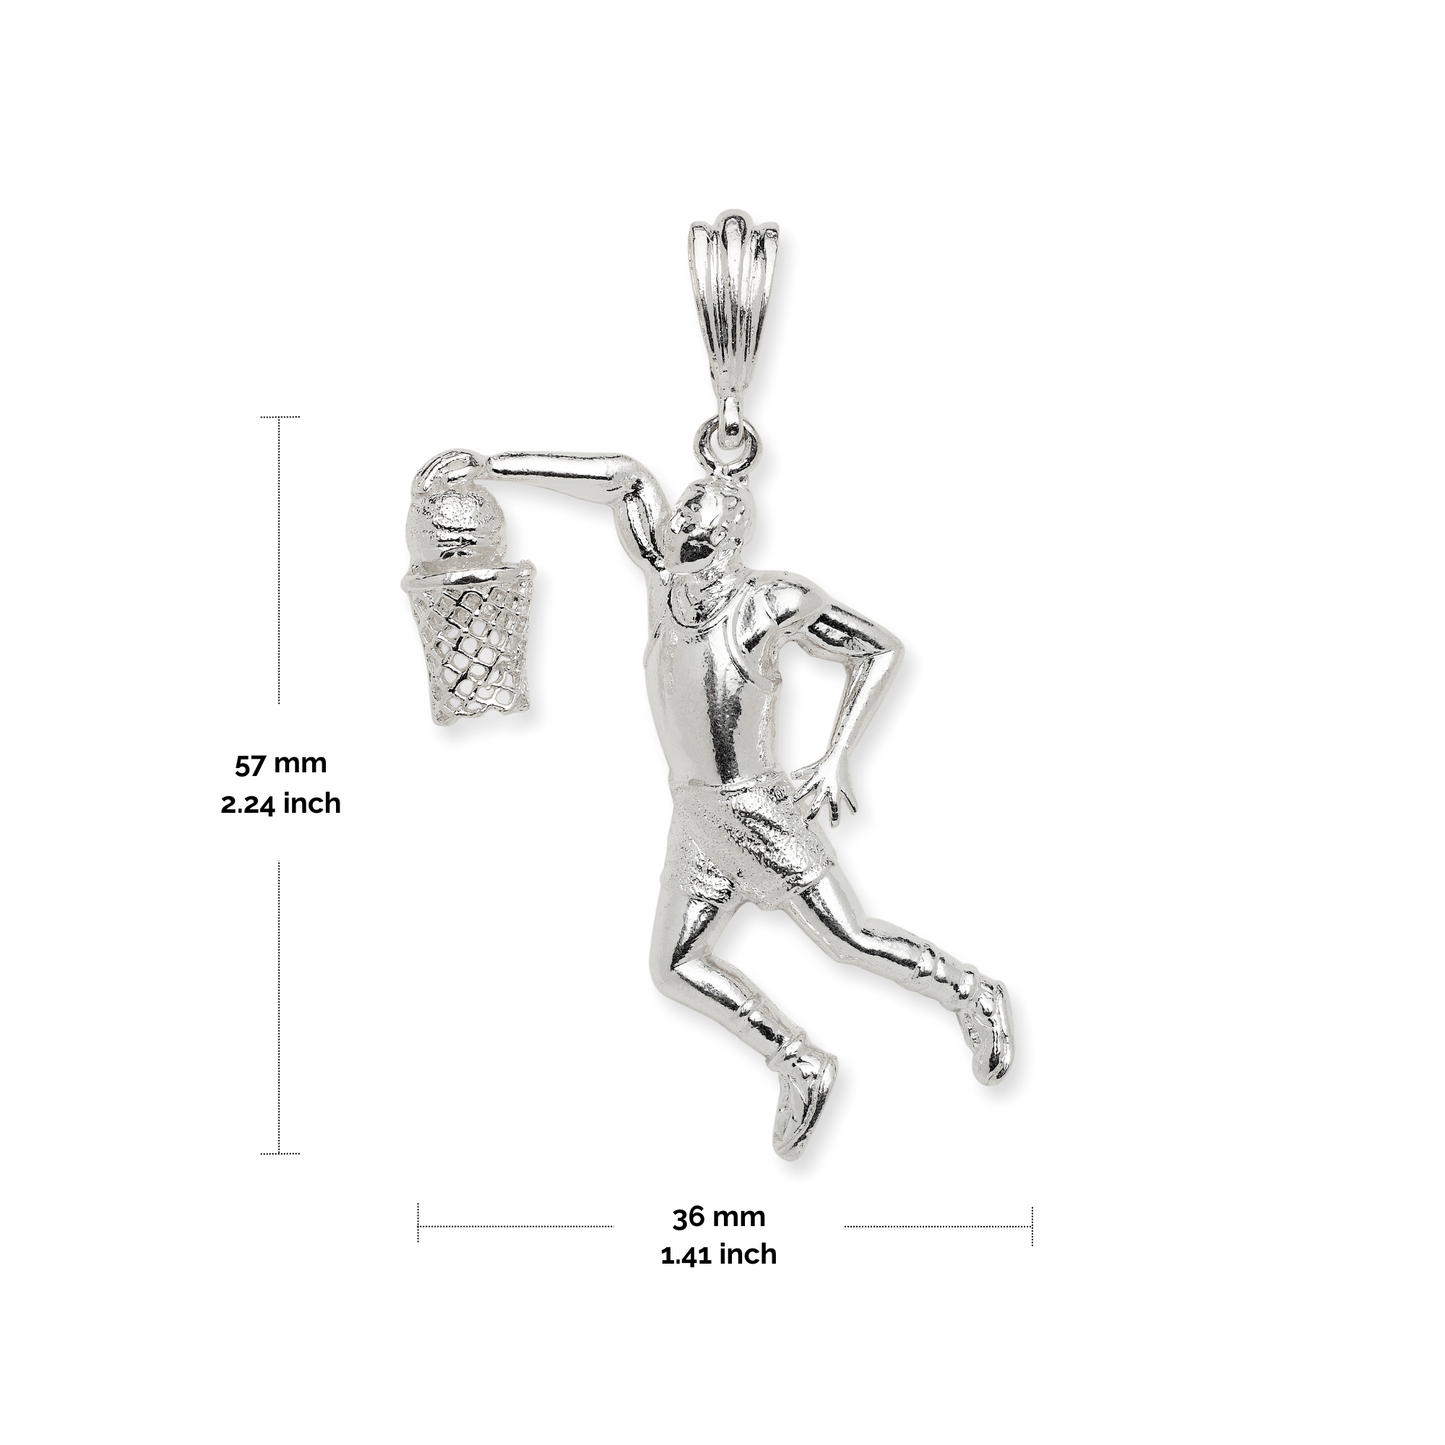 NEW! Better Jewelry .925 Sterling Silver Jump Slam Dunk Basketball Player Sports Vintage Charm Pendant